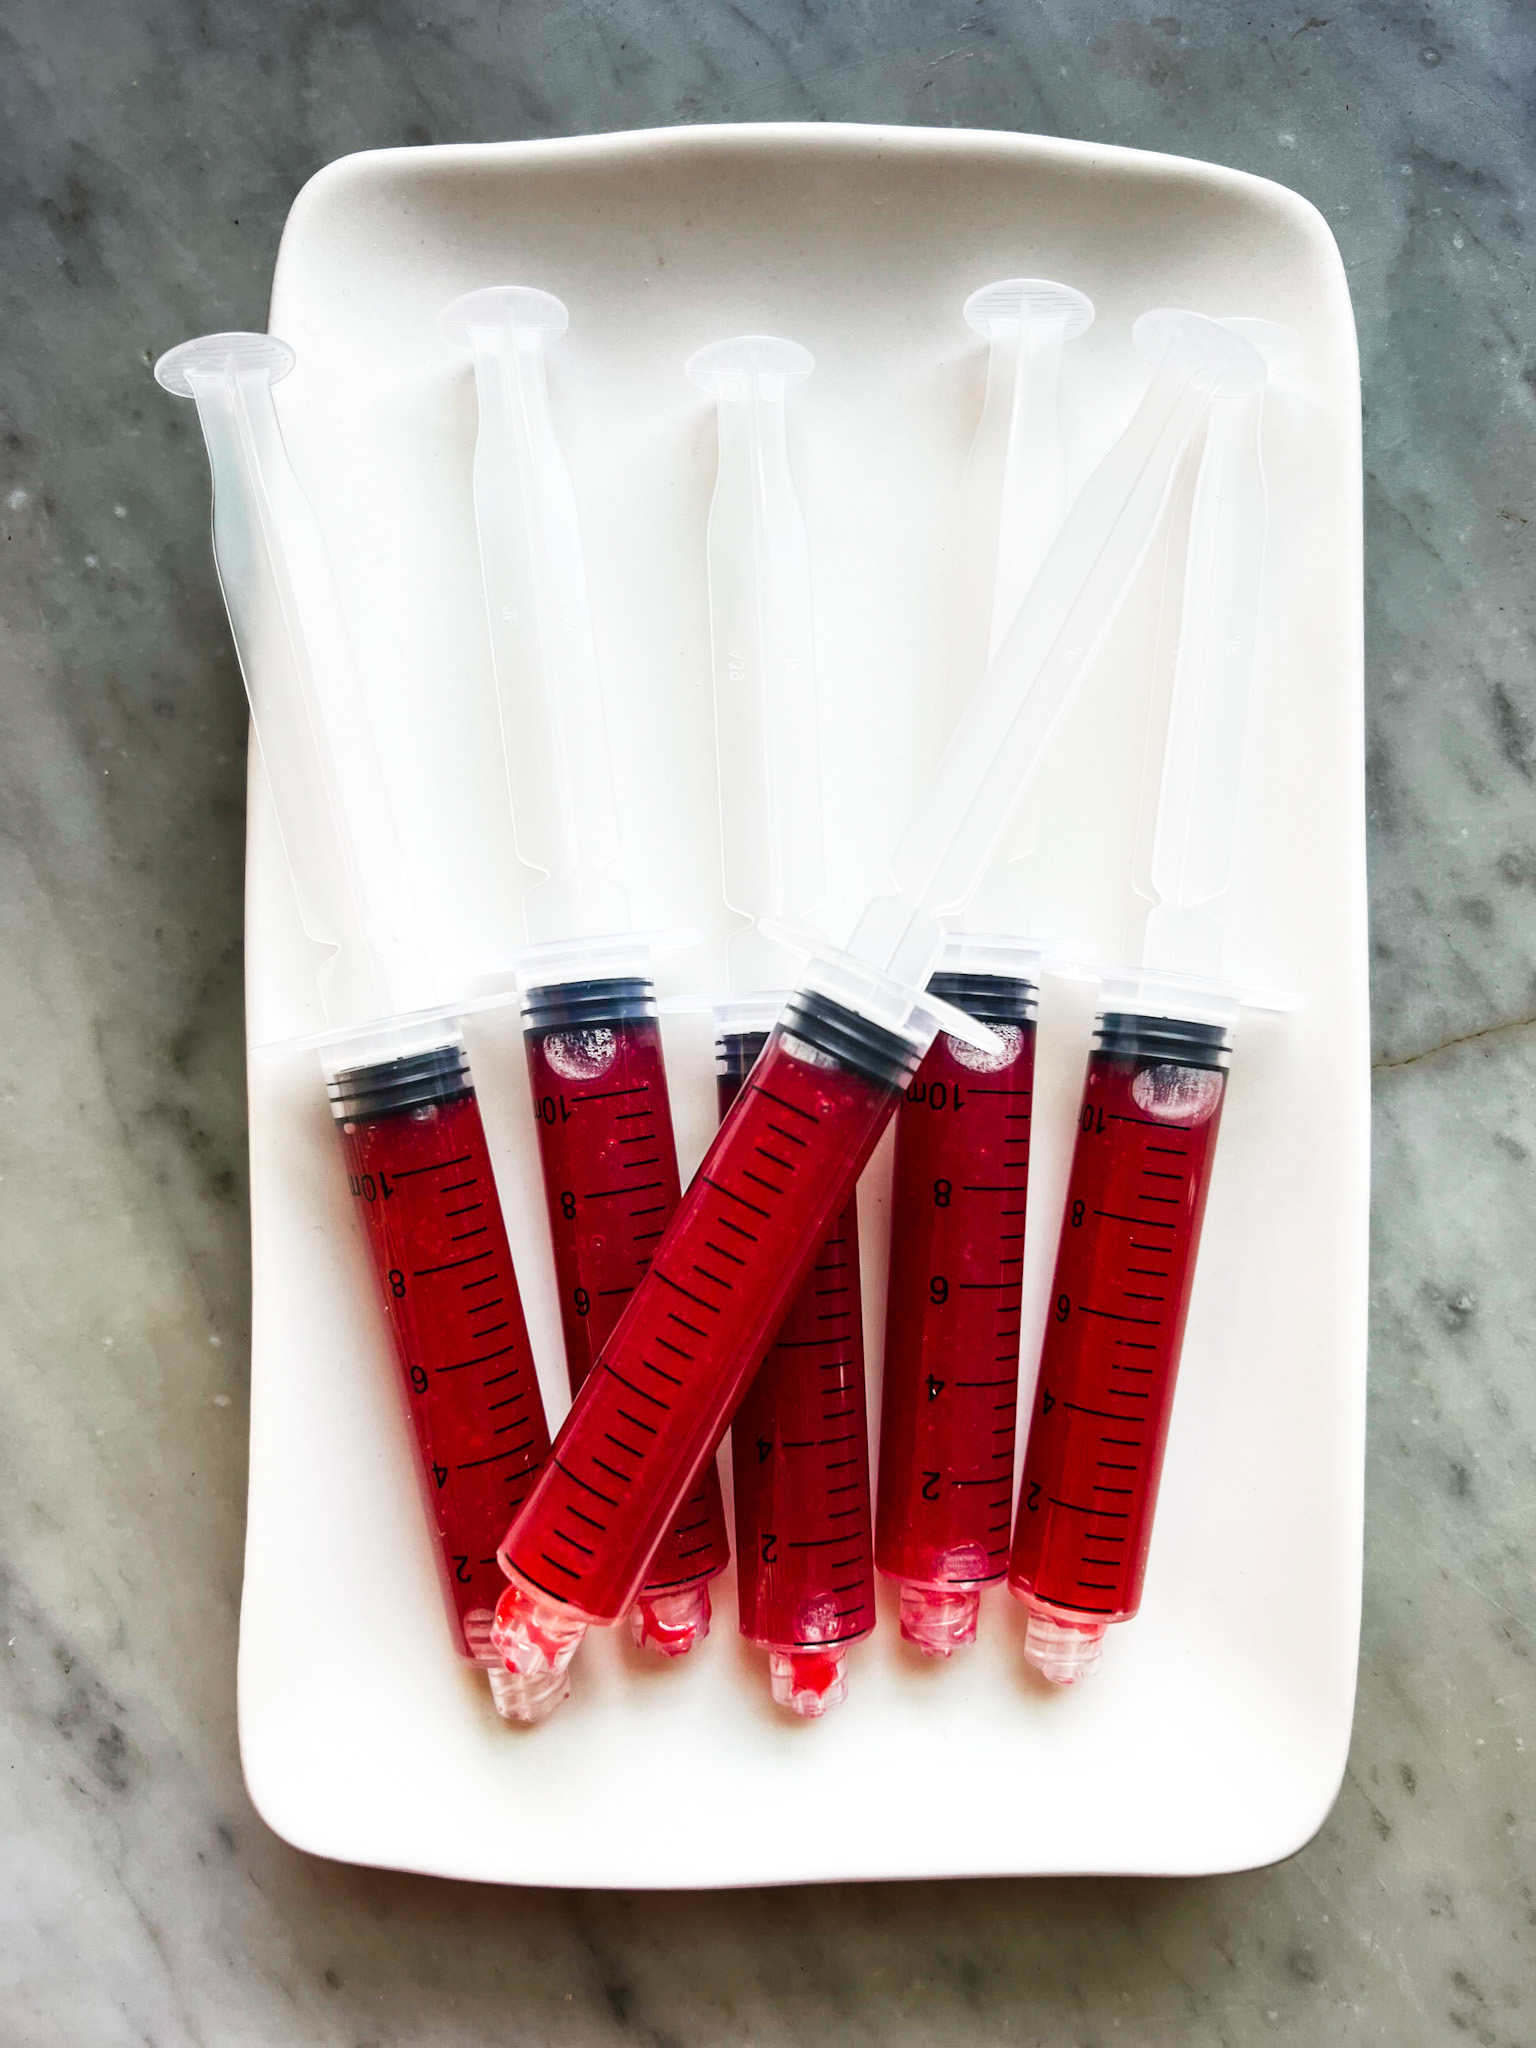 Syringes filled with raspberry shots